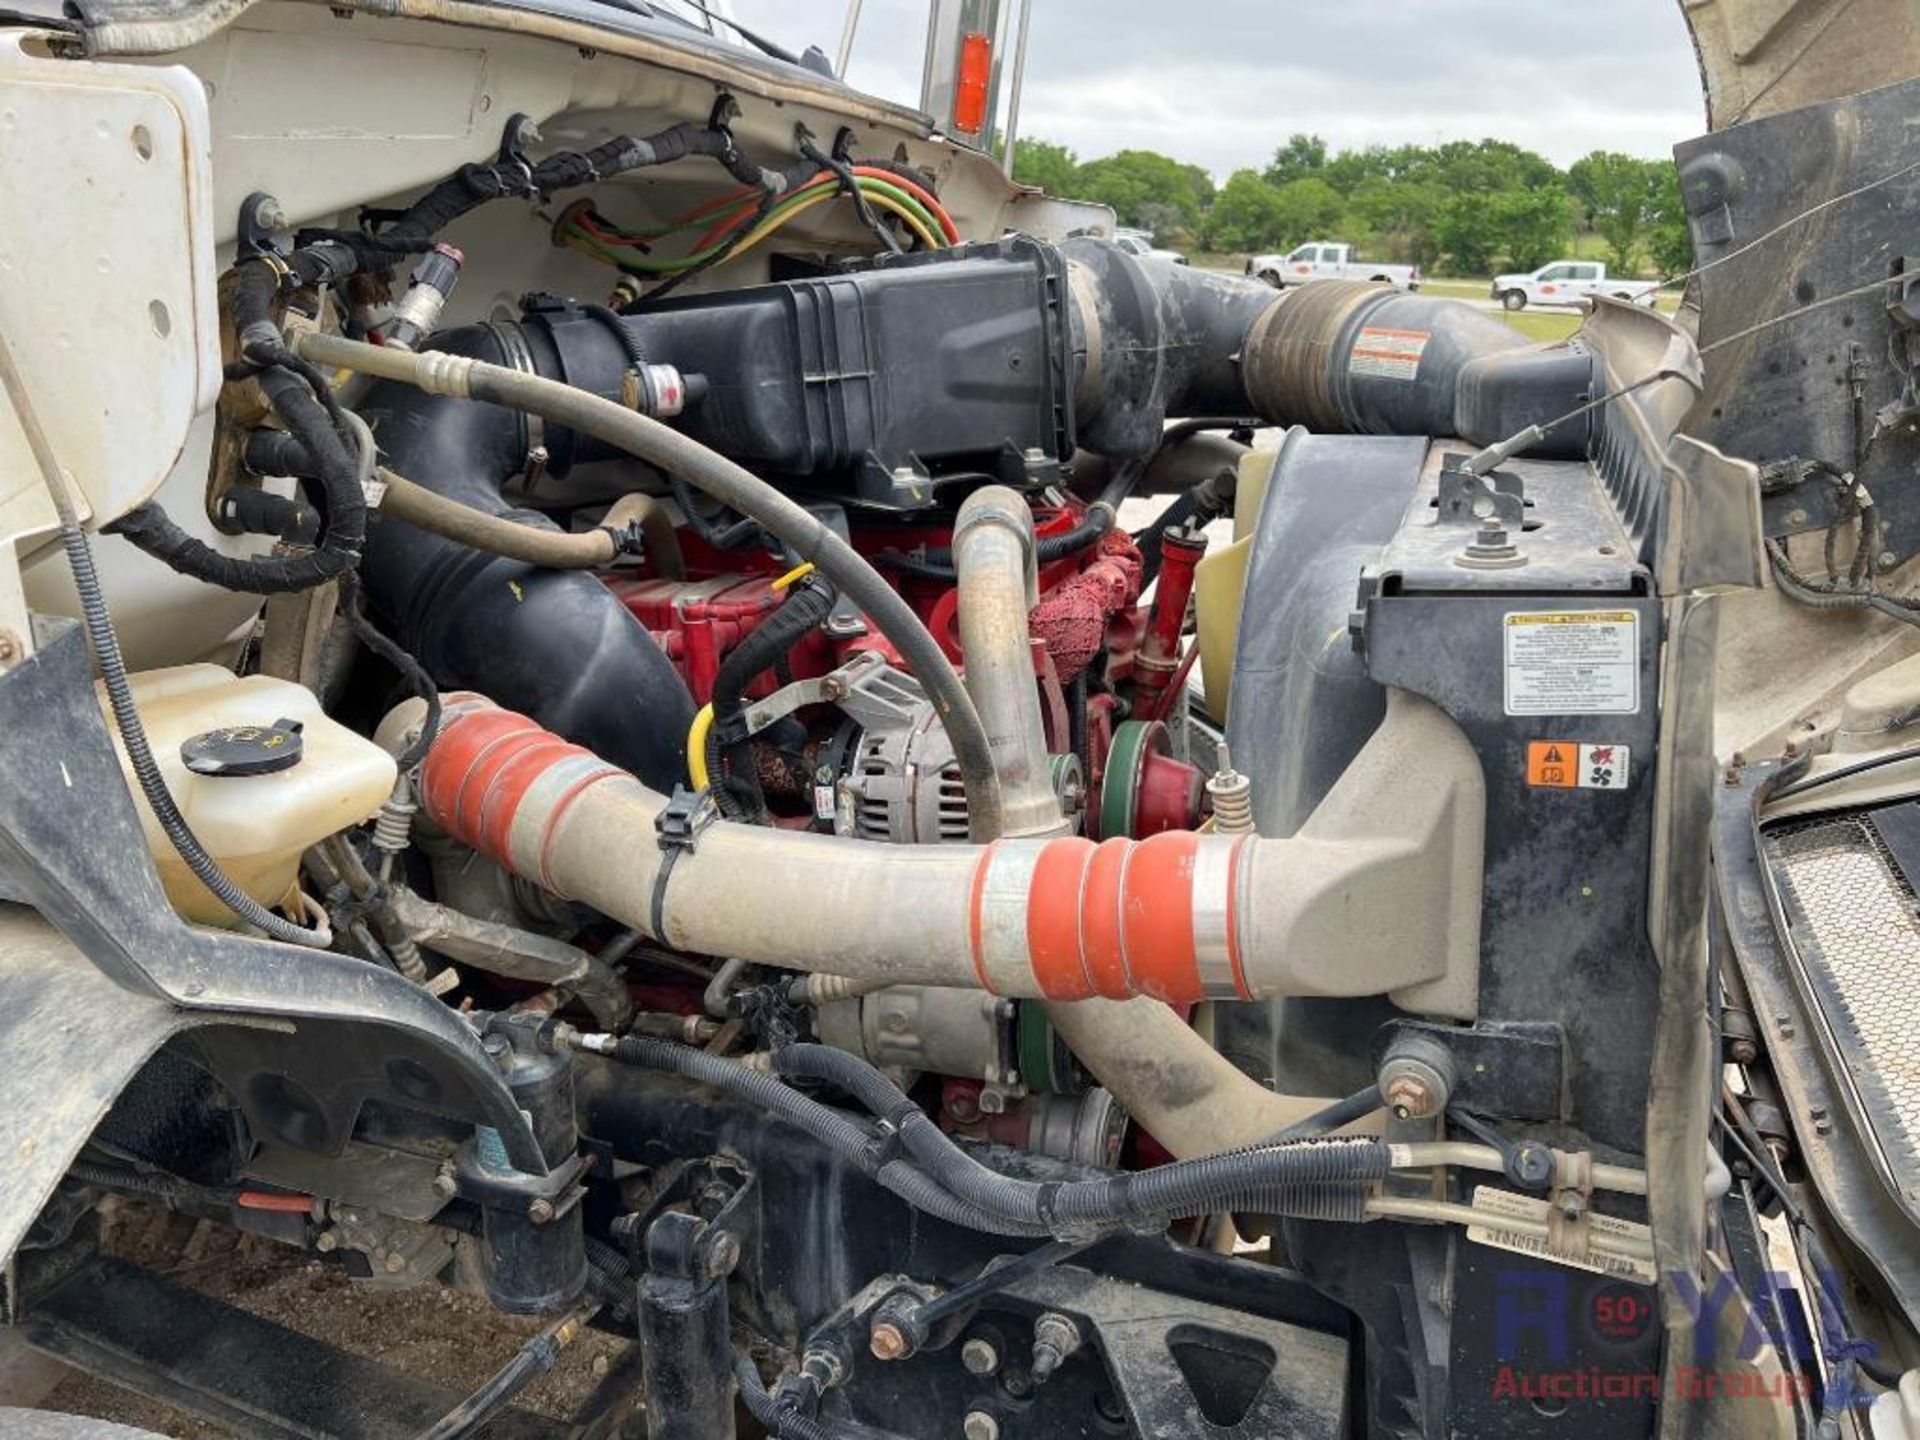 2013 Ford F750 IMT 7500 Crane Truck - Image 15 of 68